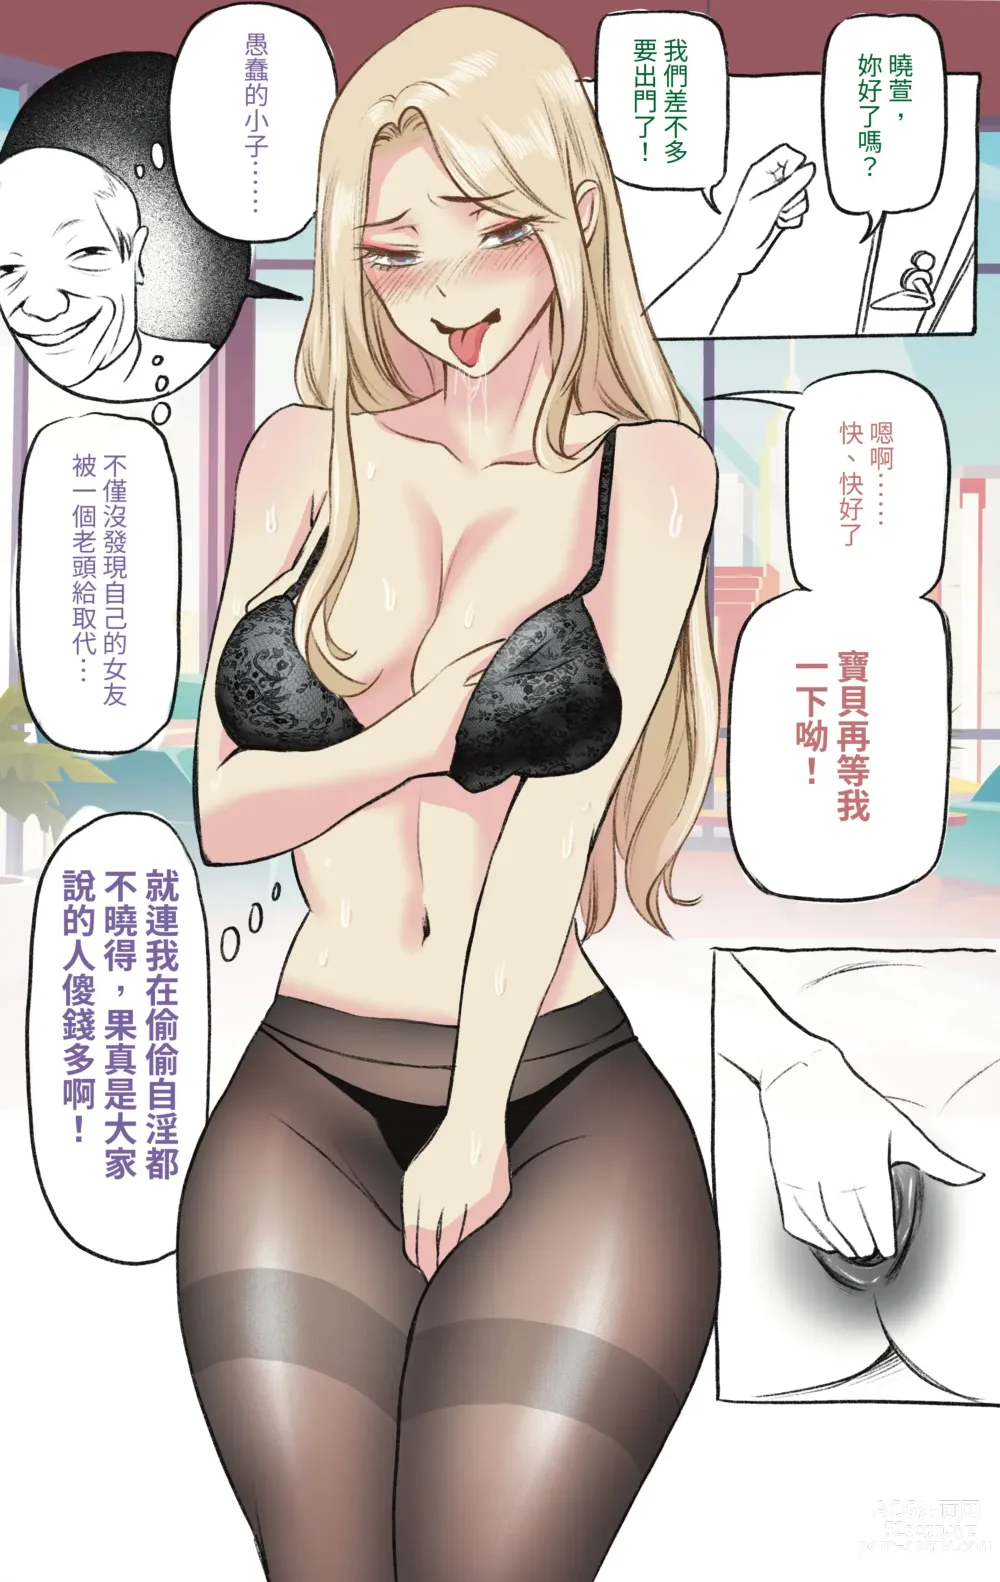 Page 6 of doujinshi 主管的秘密2